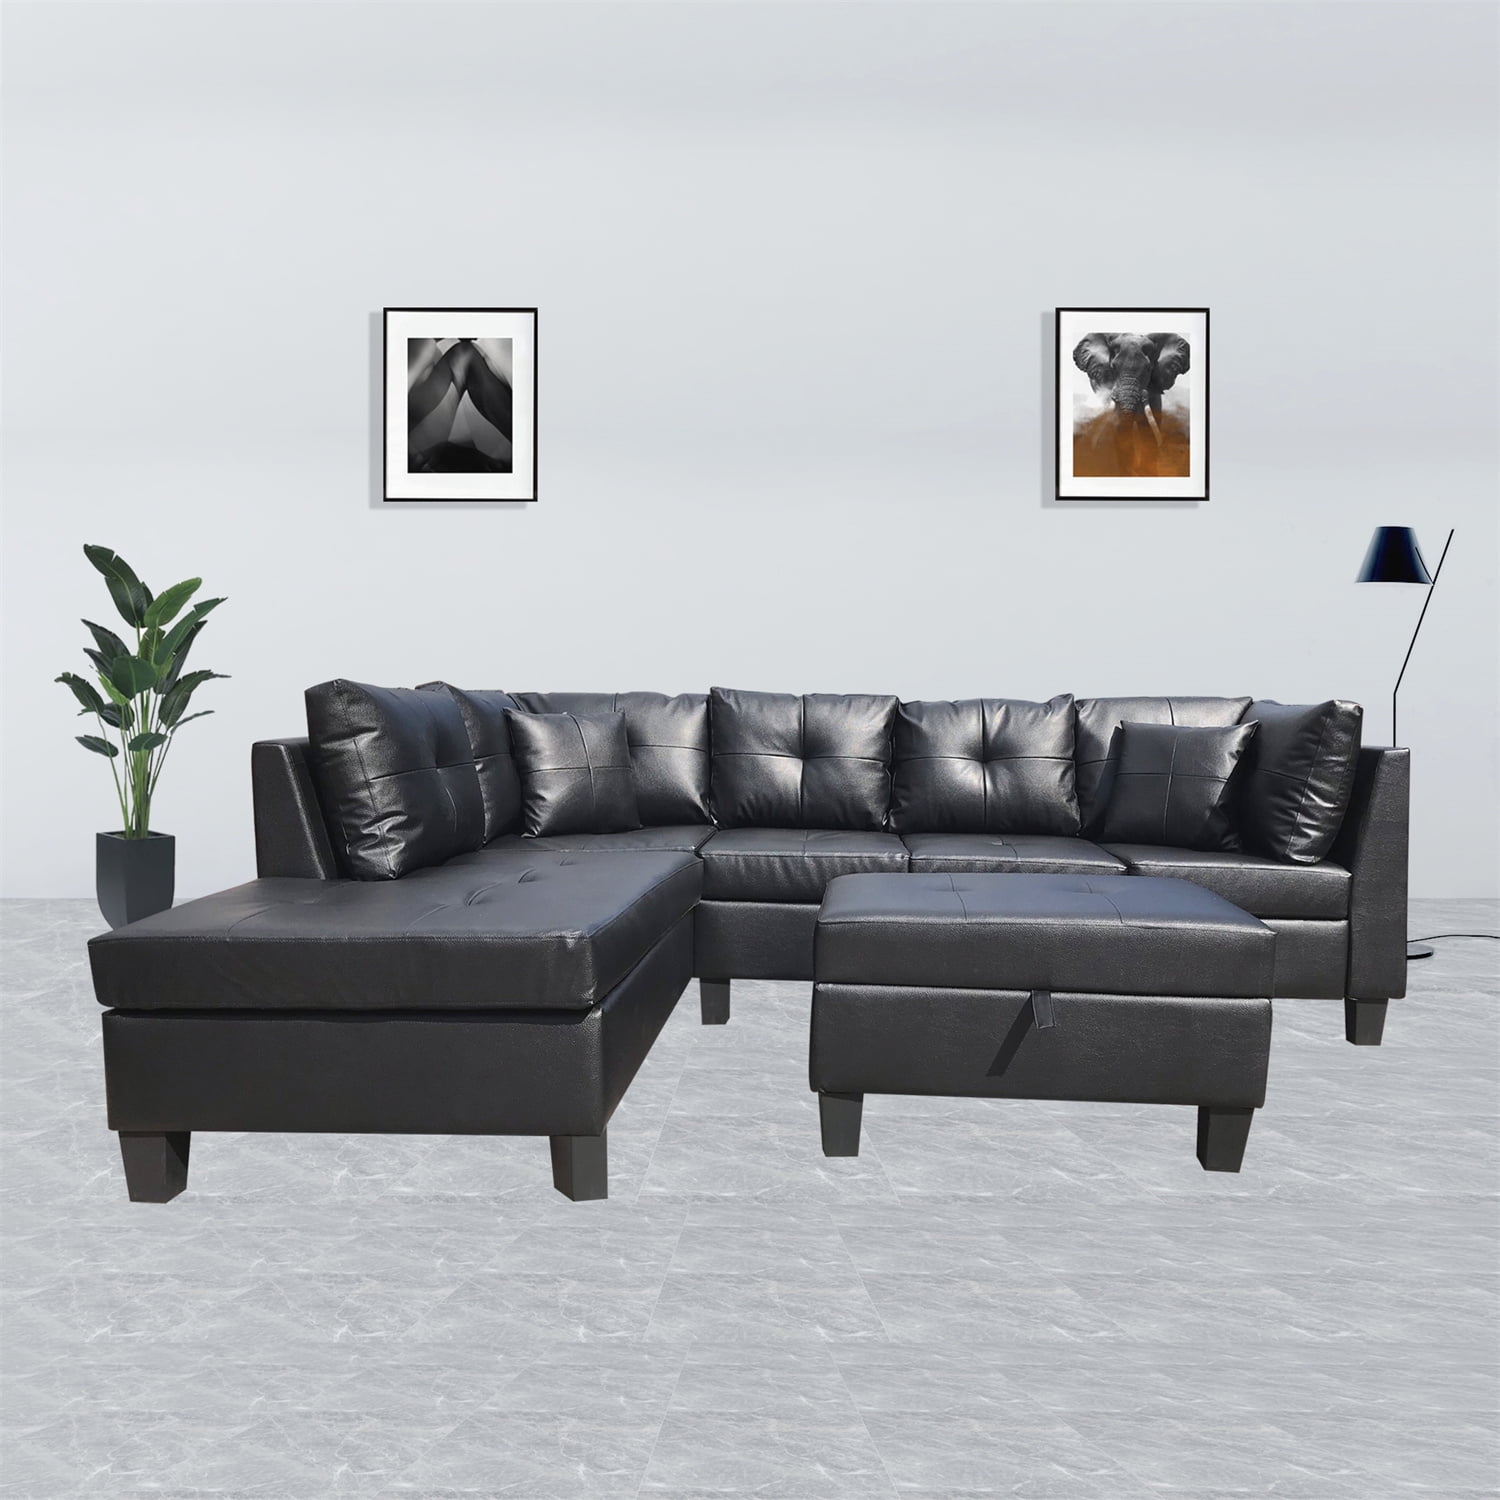 Details about   NEW Black Red Leather Gel 3PC Sofa Loveseat Chair Set Modern Living Furniture 